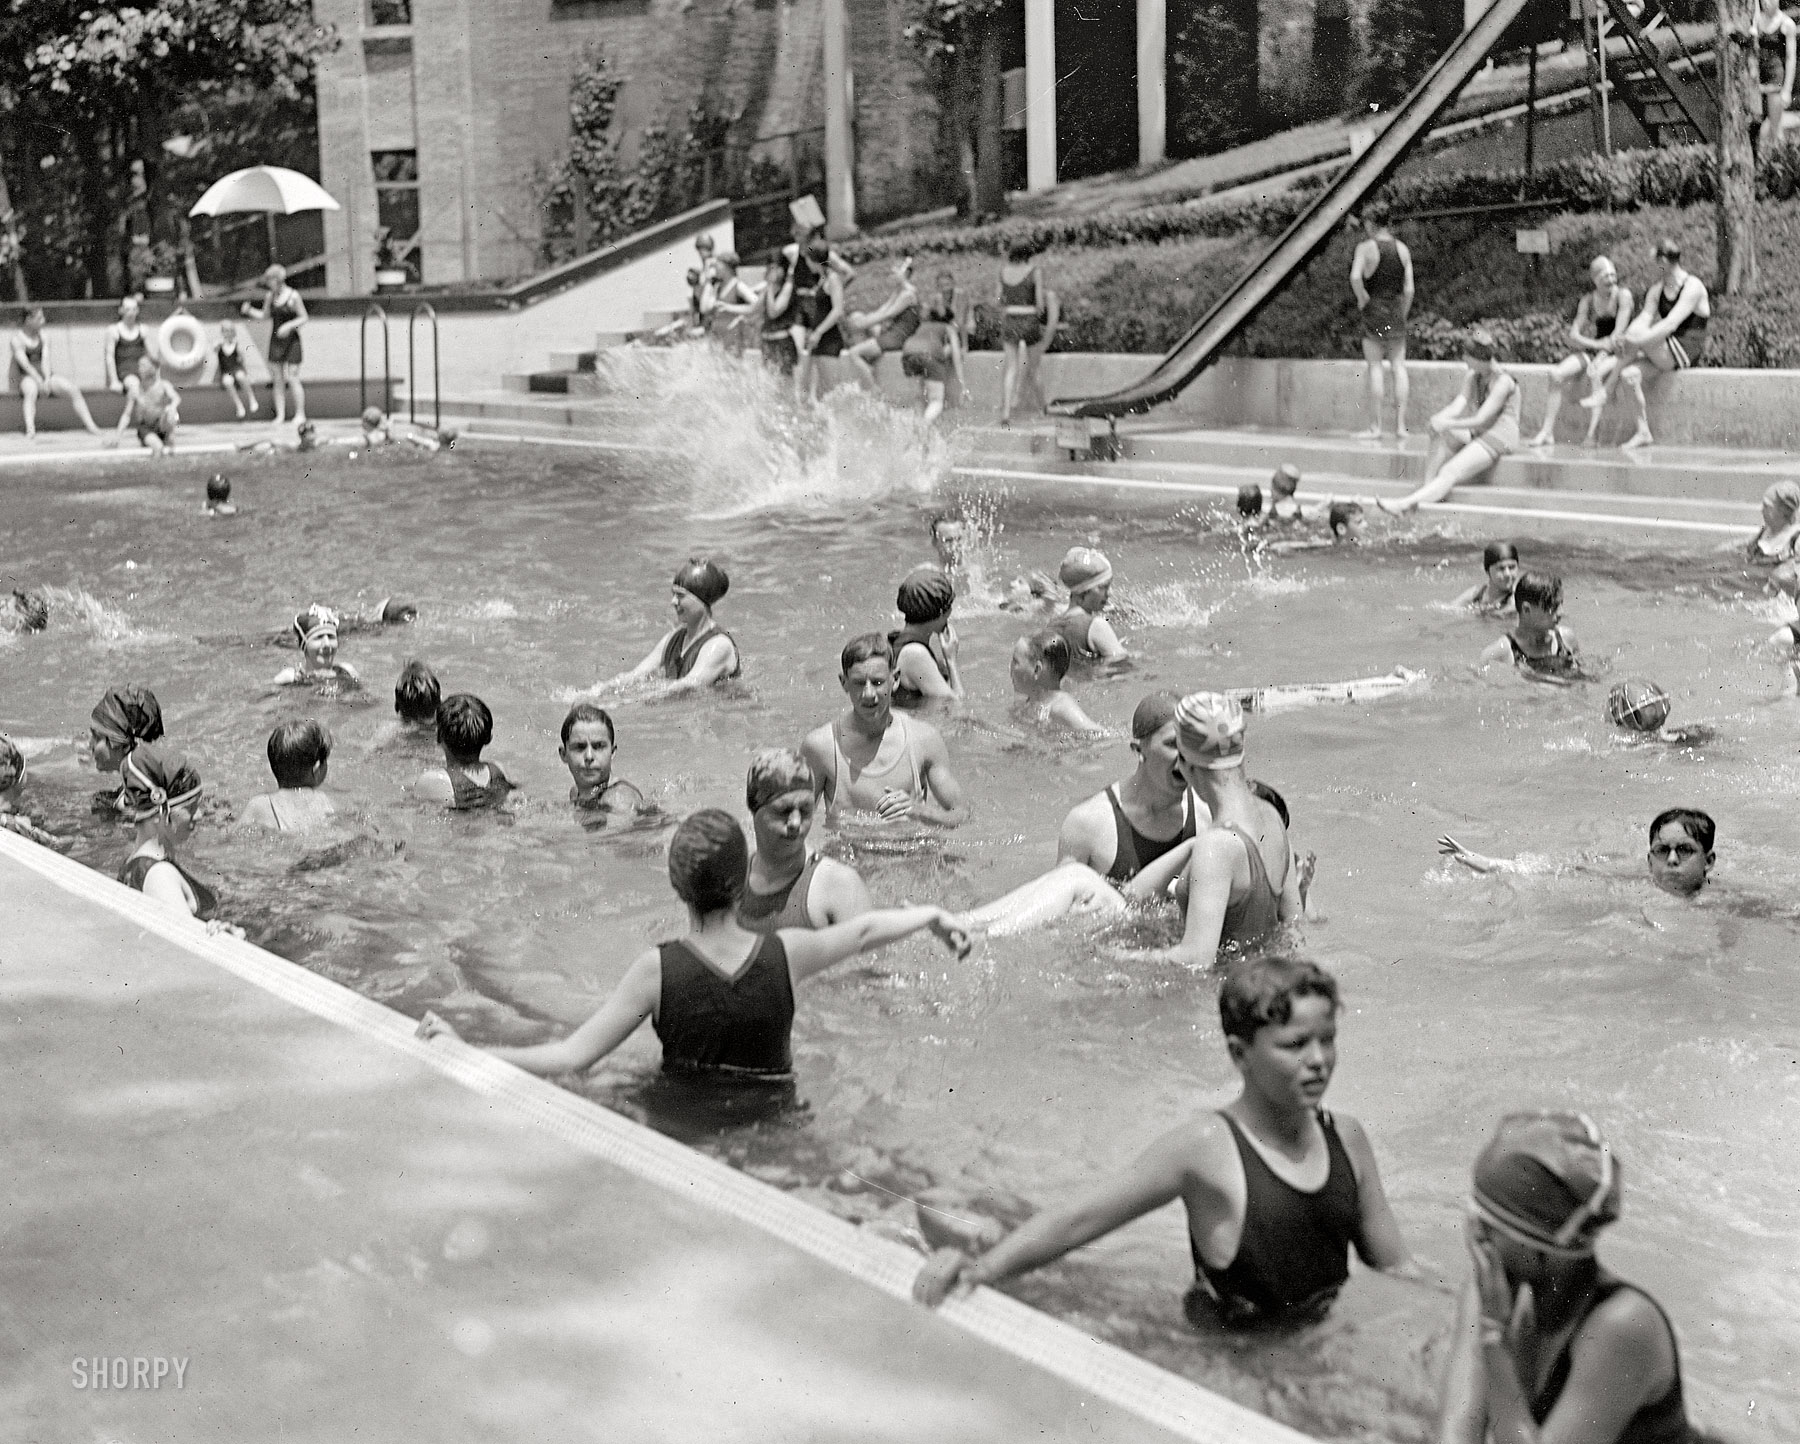 June 26, 1923. Back at the Wardman Park Hotel in Washington, D.C. Taken a year after the pool's opening in 1922, this photo shows the addition of a slide. National Photo Company Collection glass negative. View full size.